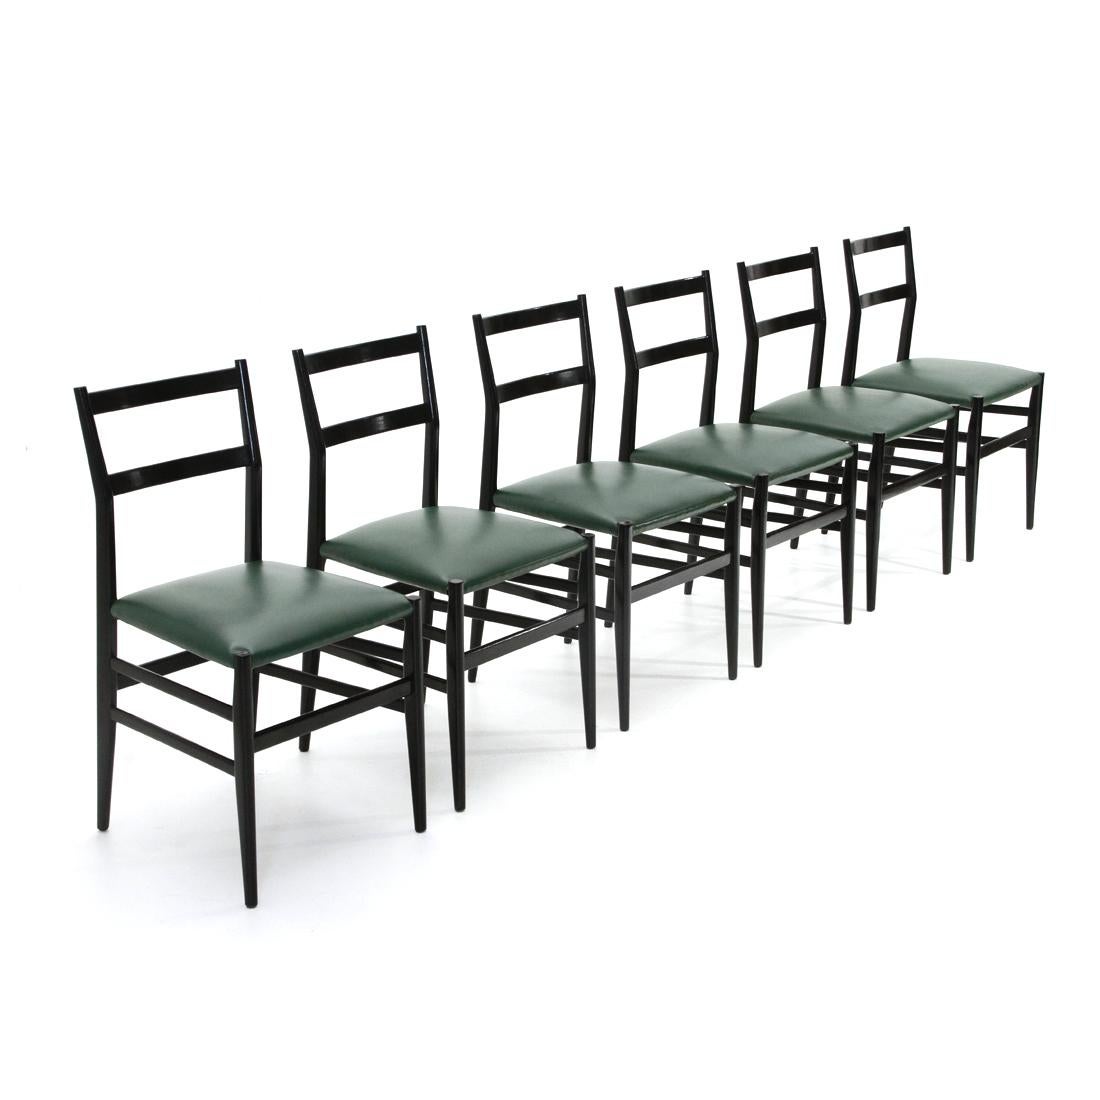 6 chairs produced in the 1950s by Cassina based on a design by Gio Ponti.
Structure in black painted wood.
Padded seat lined in green eco leather.
Good general condition, some signs of normal use over time.

Dimensions: Width 43 cm, depth 43